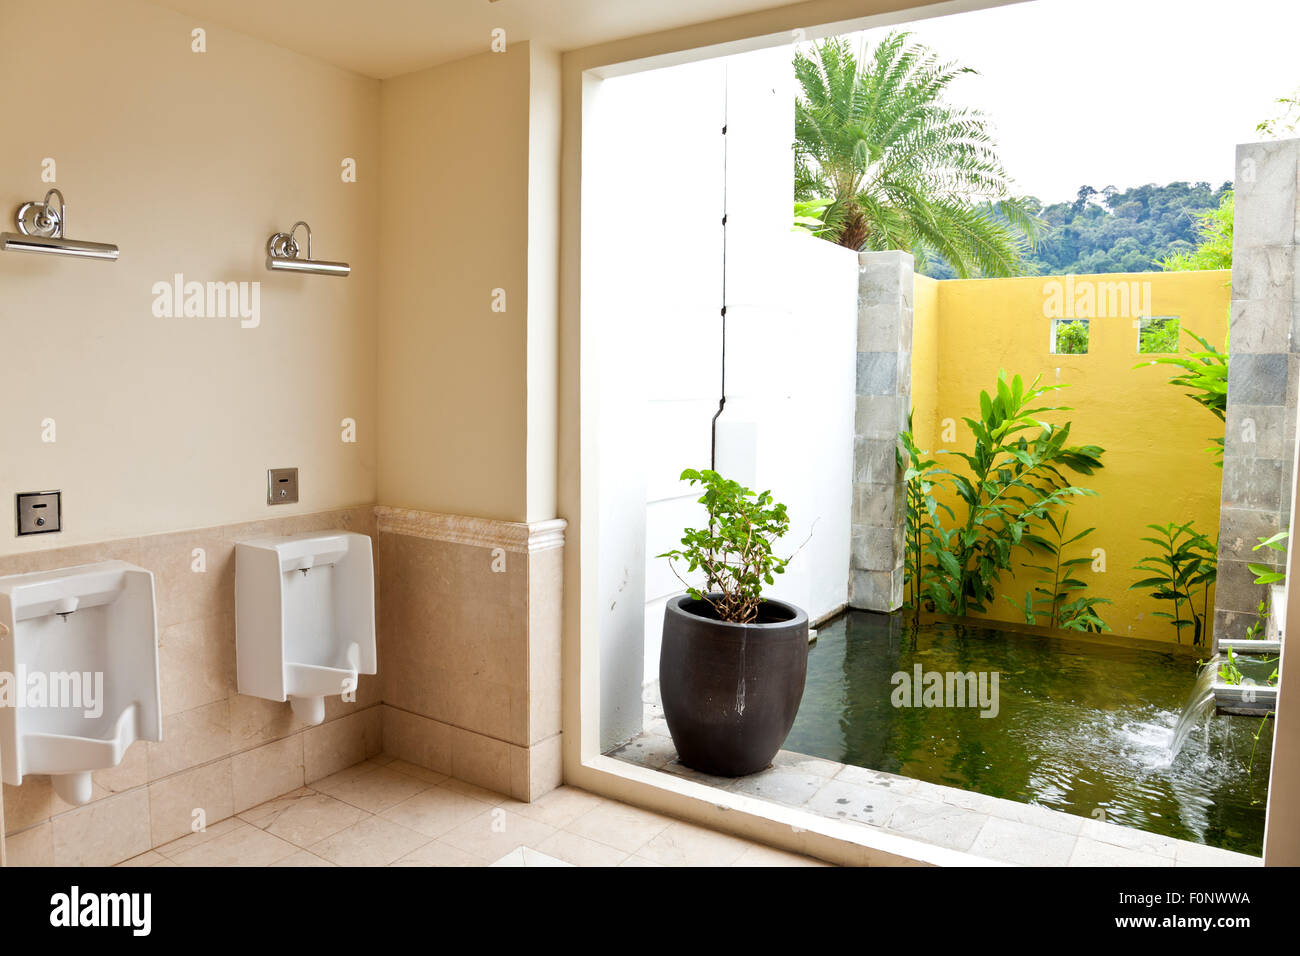 Male toilet with water feature Stock Photo